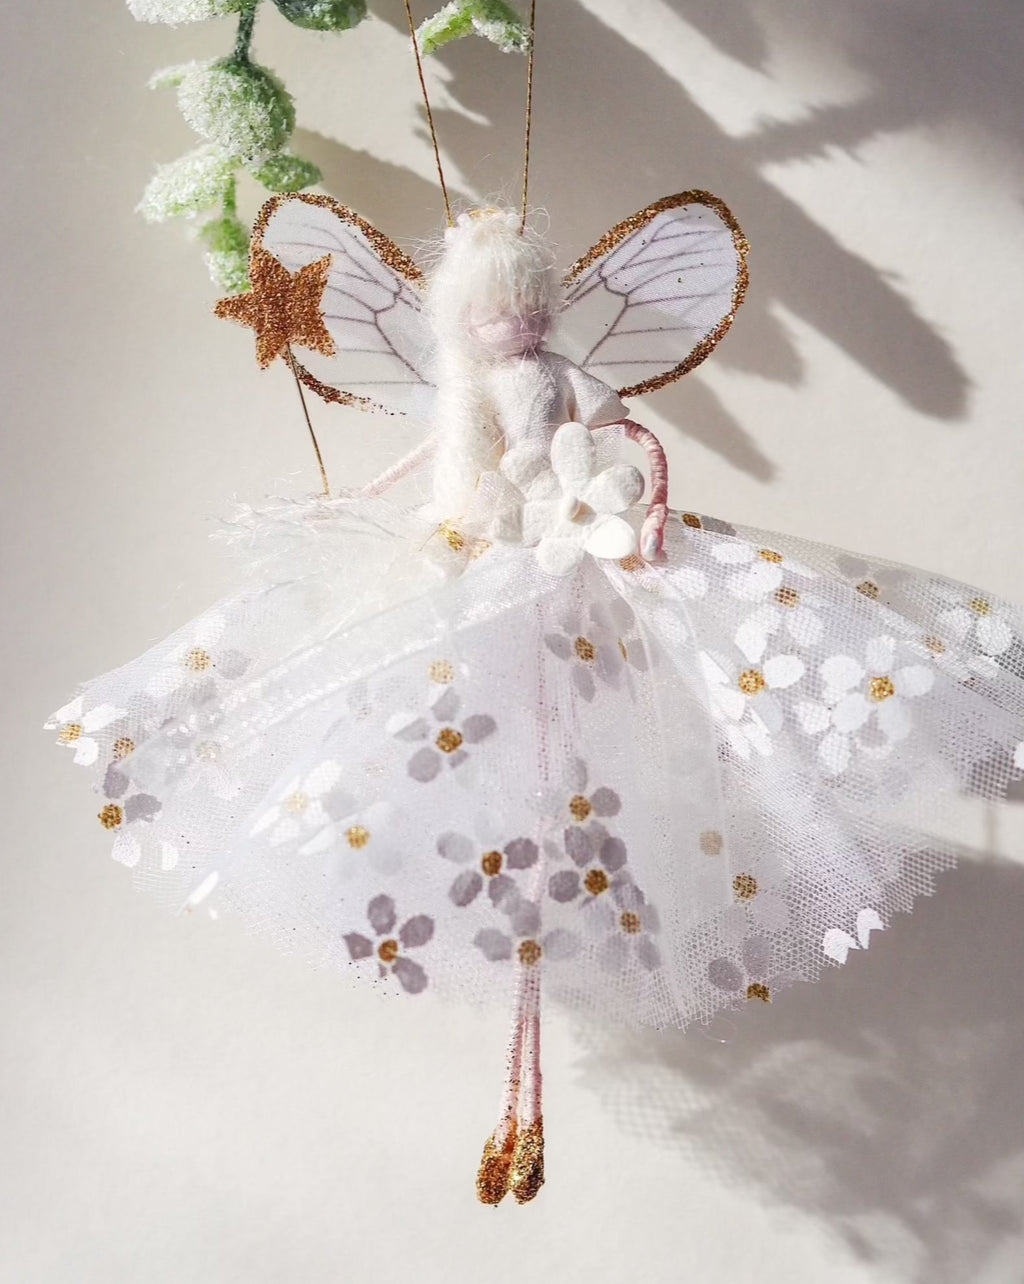 ‘Hope’ Fairy Decoration, Handmade fairy decoration that makes the perfect heirloom gift for Birthdays, Easter and Special Occasions.